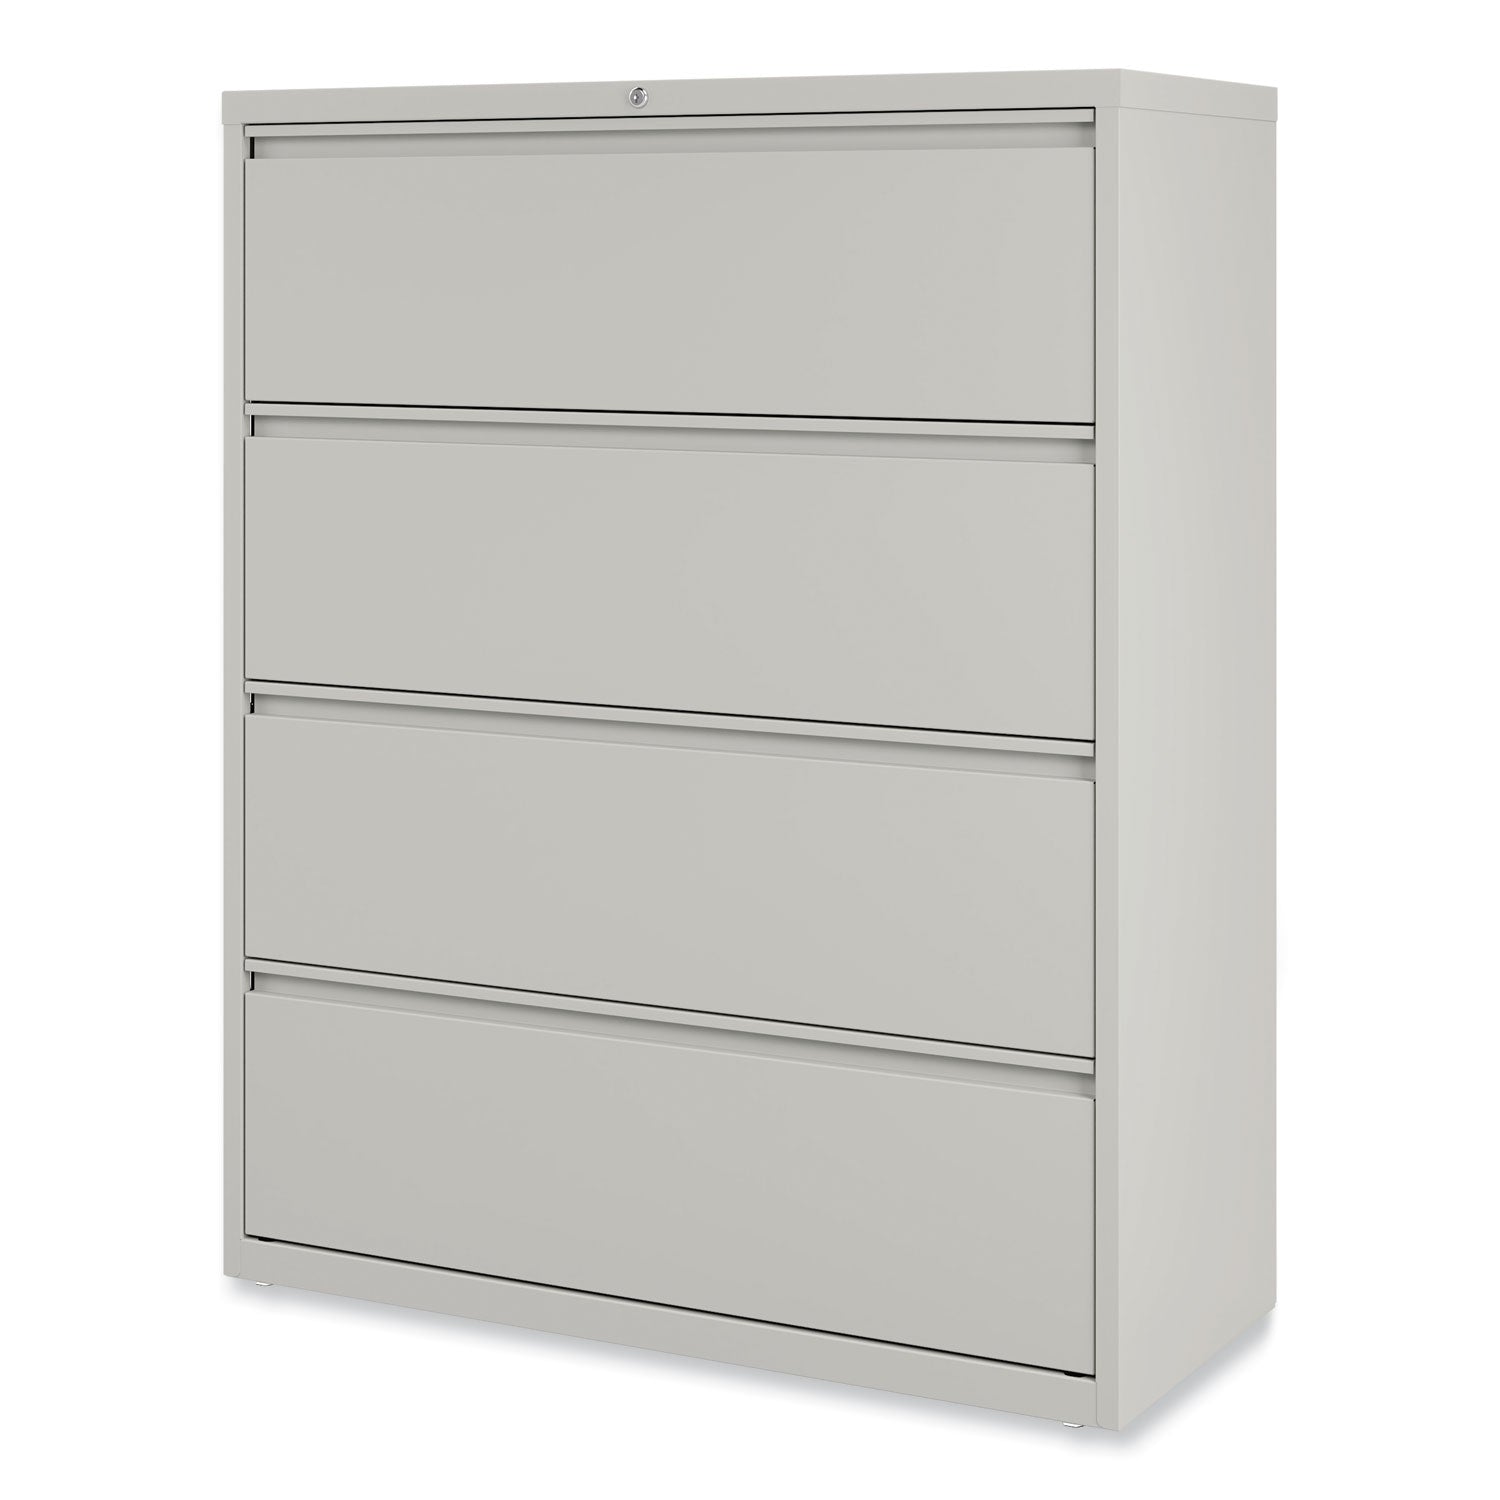 lateral-file-4-legal-letter-size-file-drawers-light-gray-42-x-1863-x-525_alehlf4254lg - 8